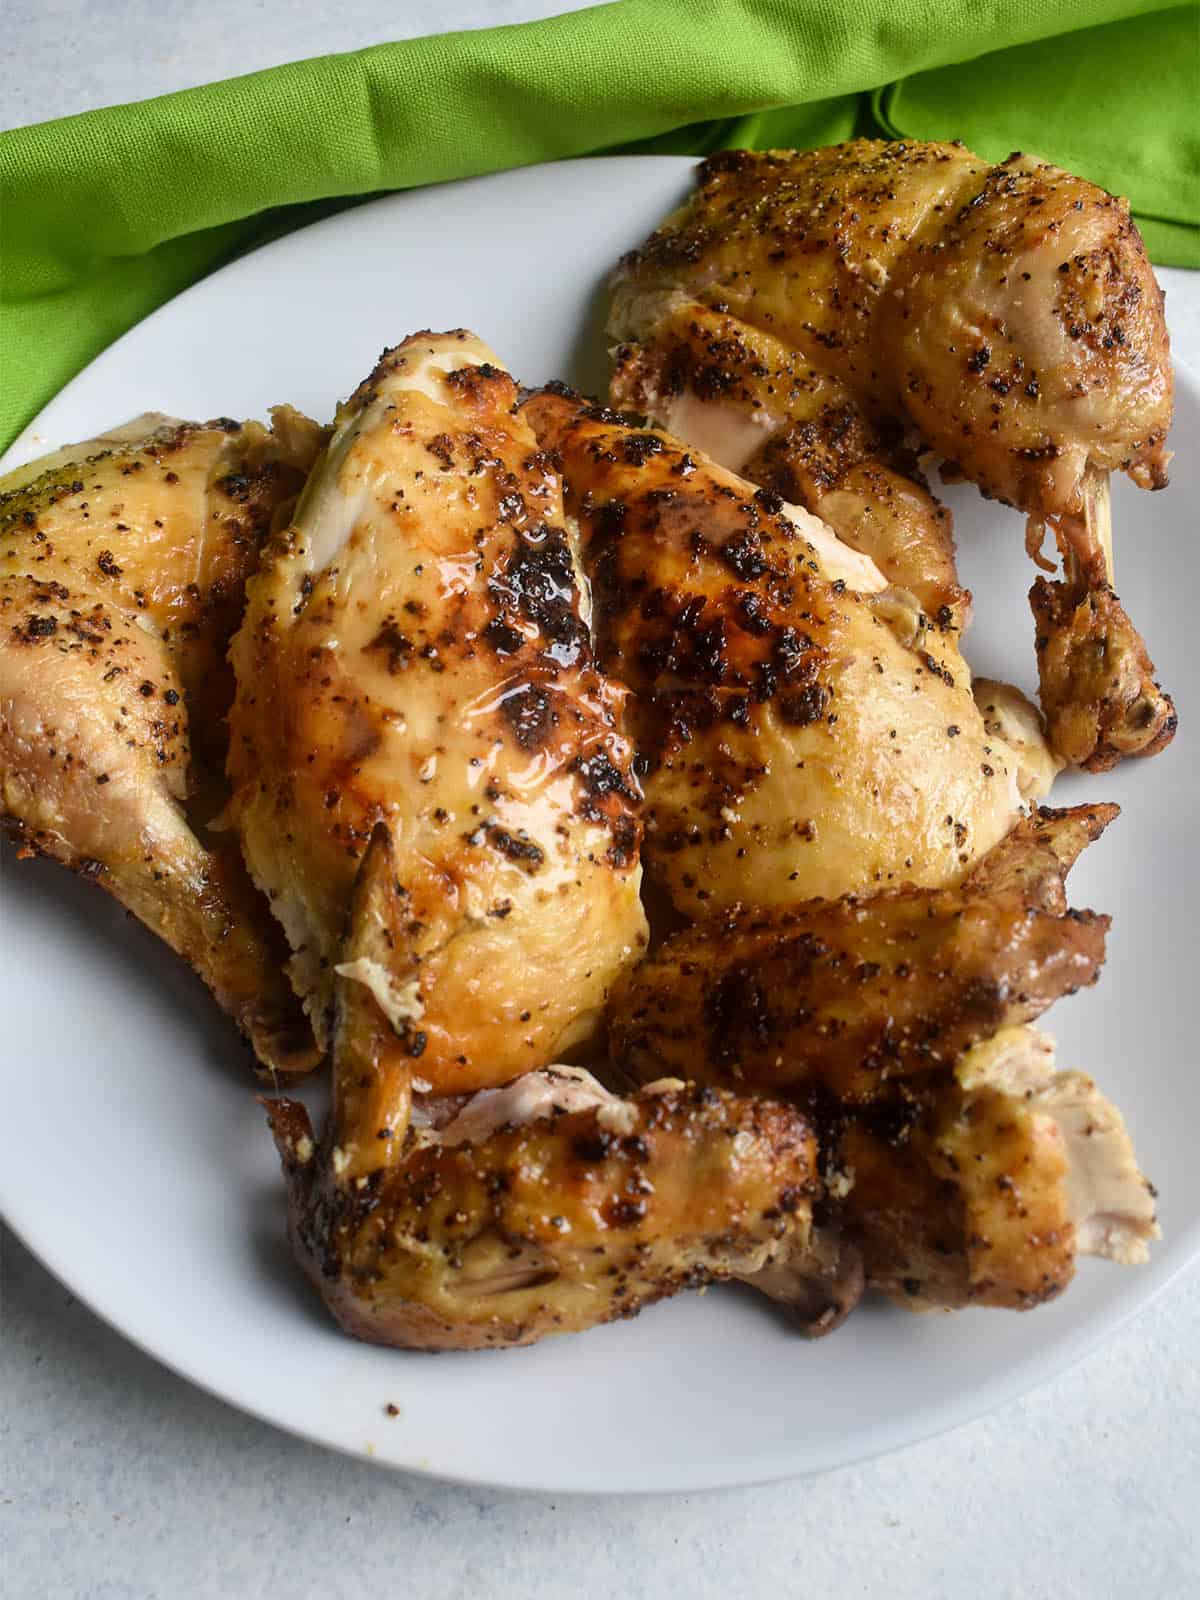 roasted chicken on a white plate with a green napkin